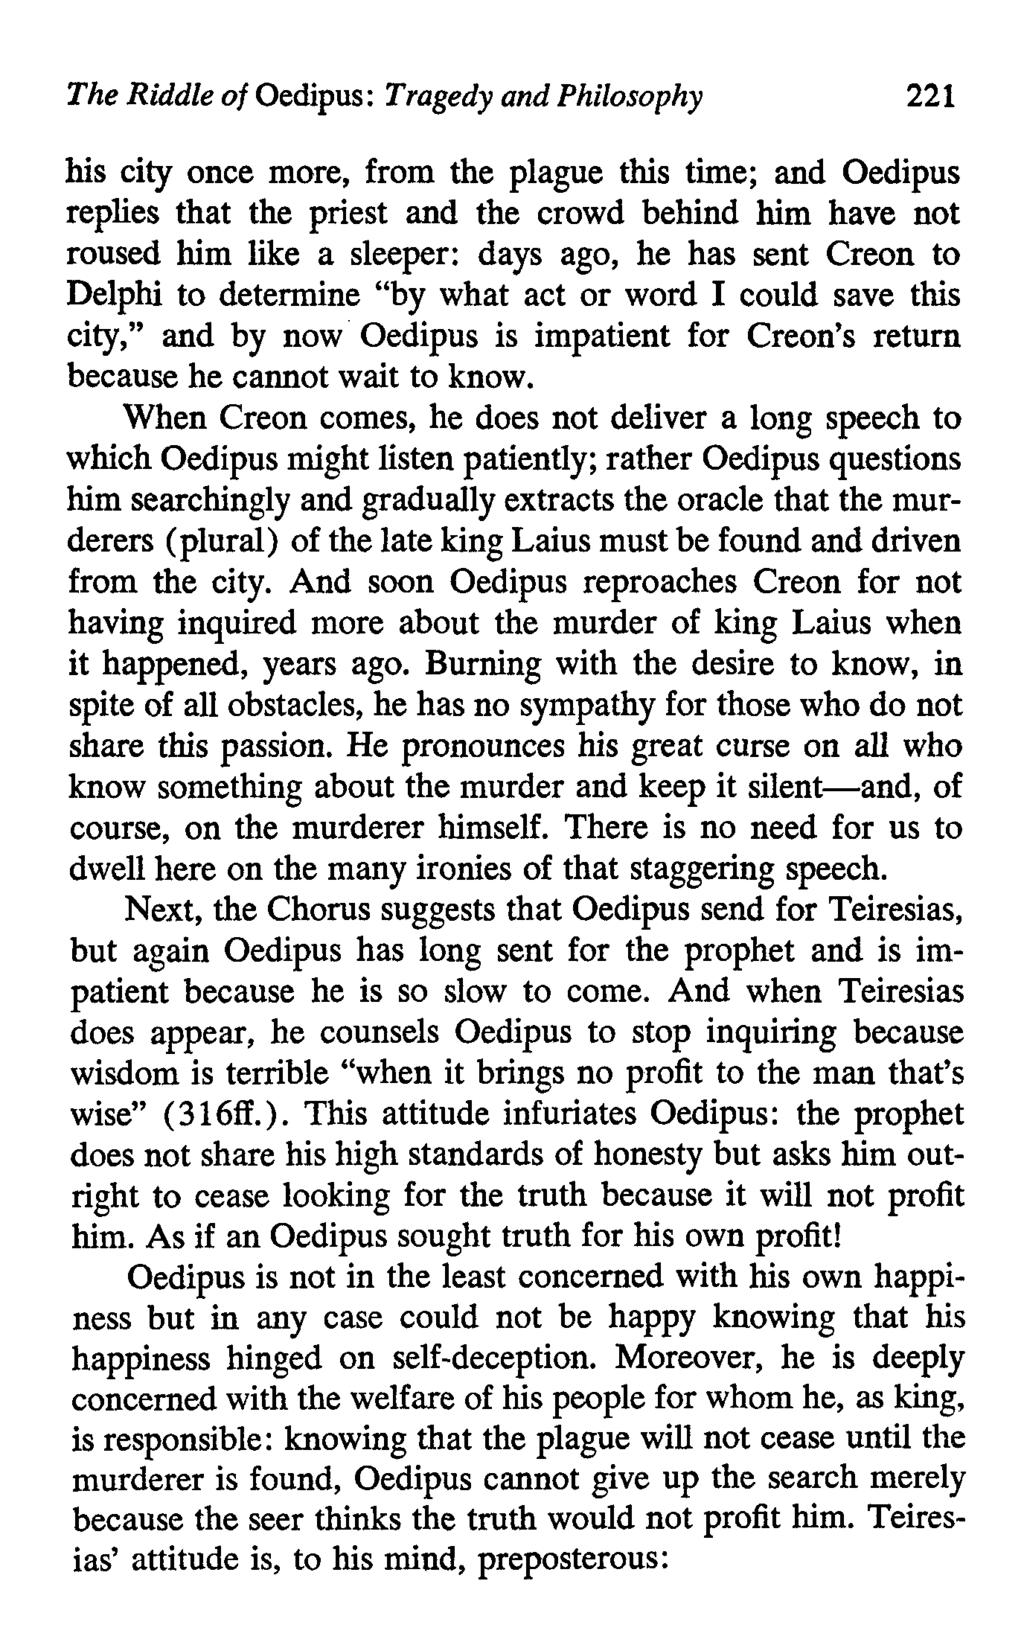 The Riddle of Oedipus: Tragedy and Philosophy 221 his city once more, from the plague this time; and Oedipus replies that the priest and the crowd behind him have not roused him like a sleeper: days